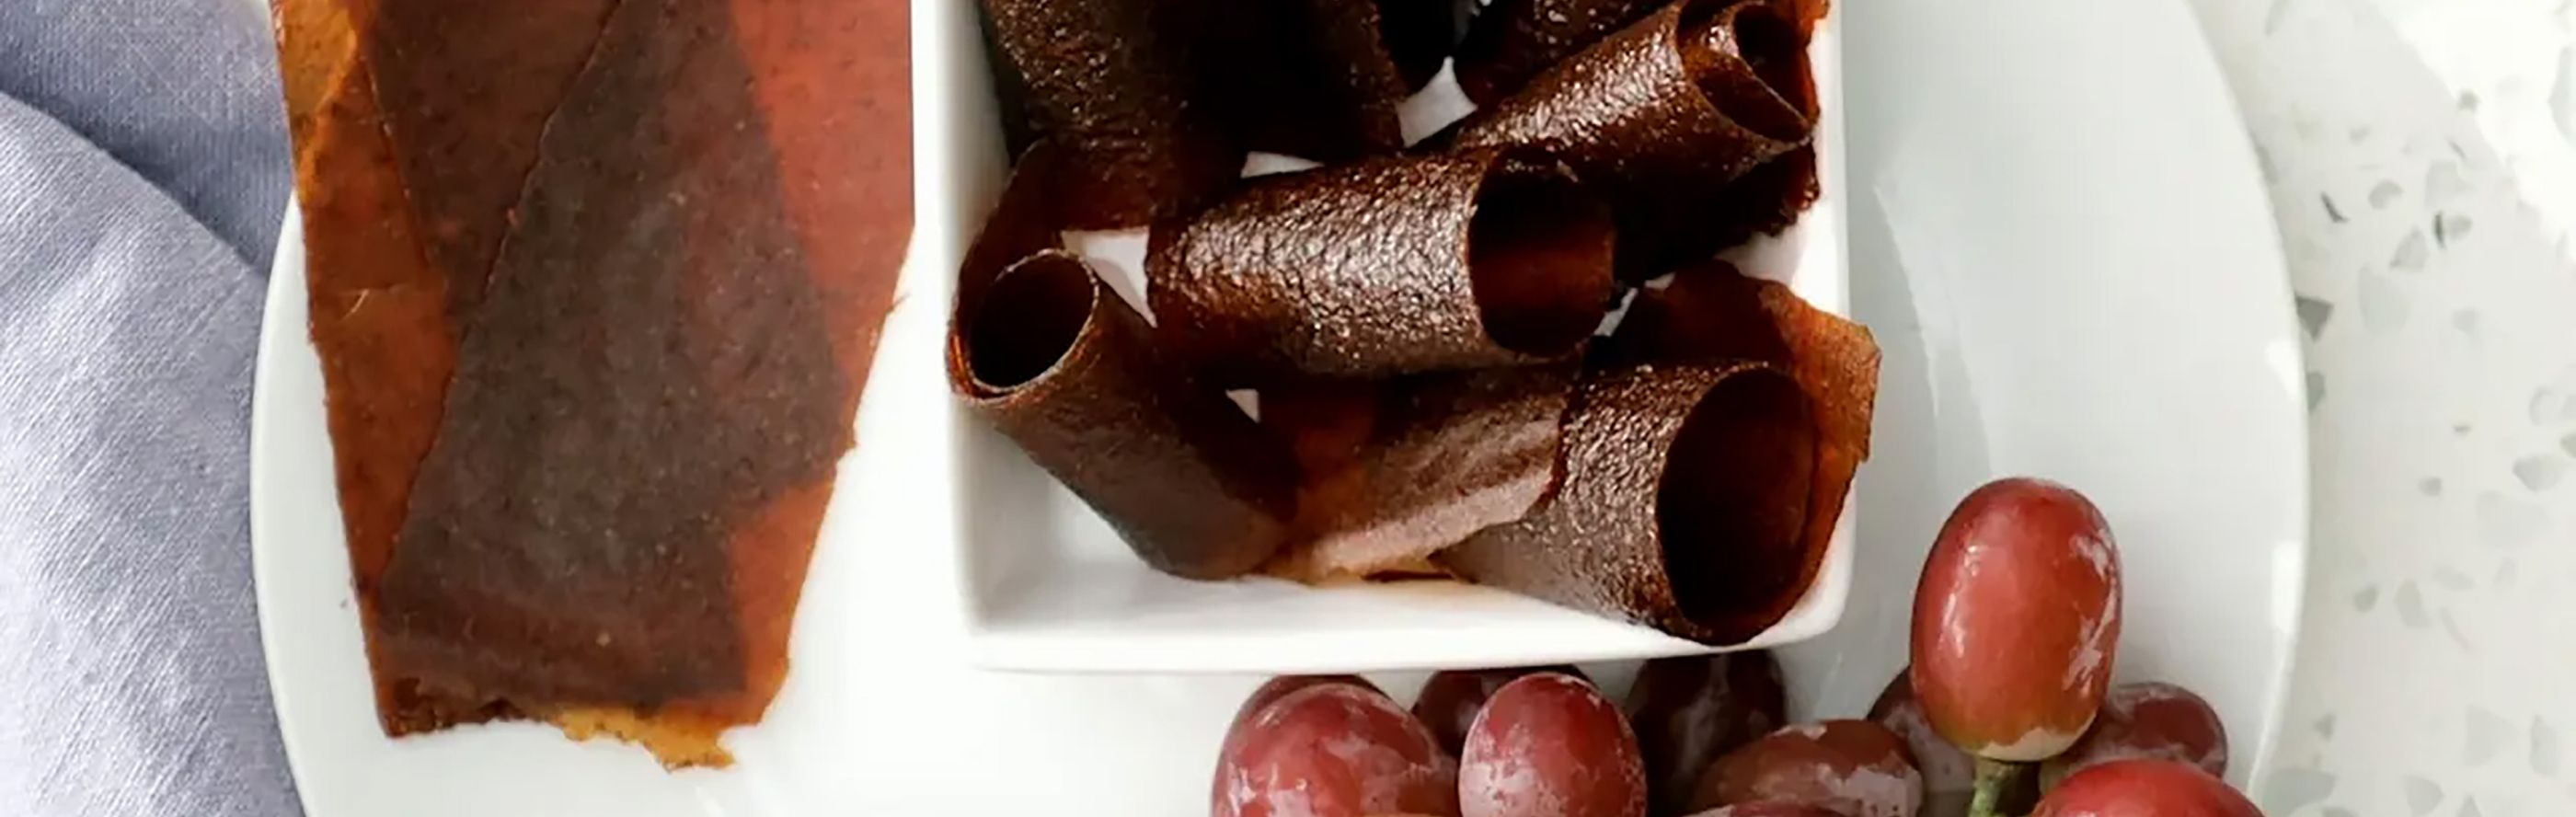 Homemade fruit leather and grapes on white dishware.